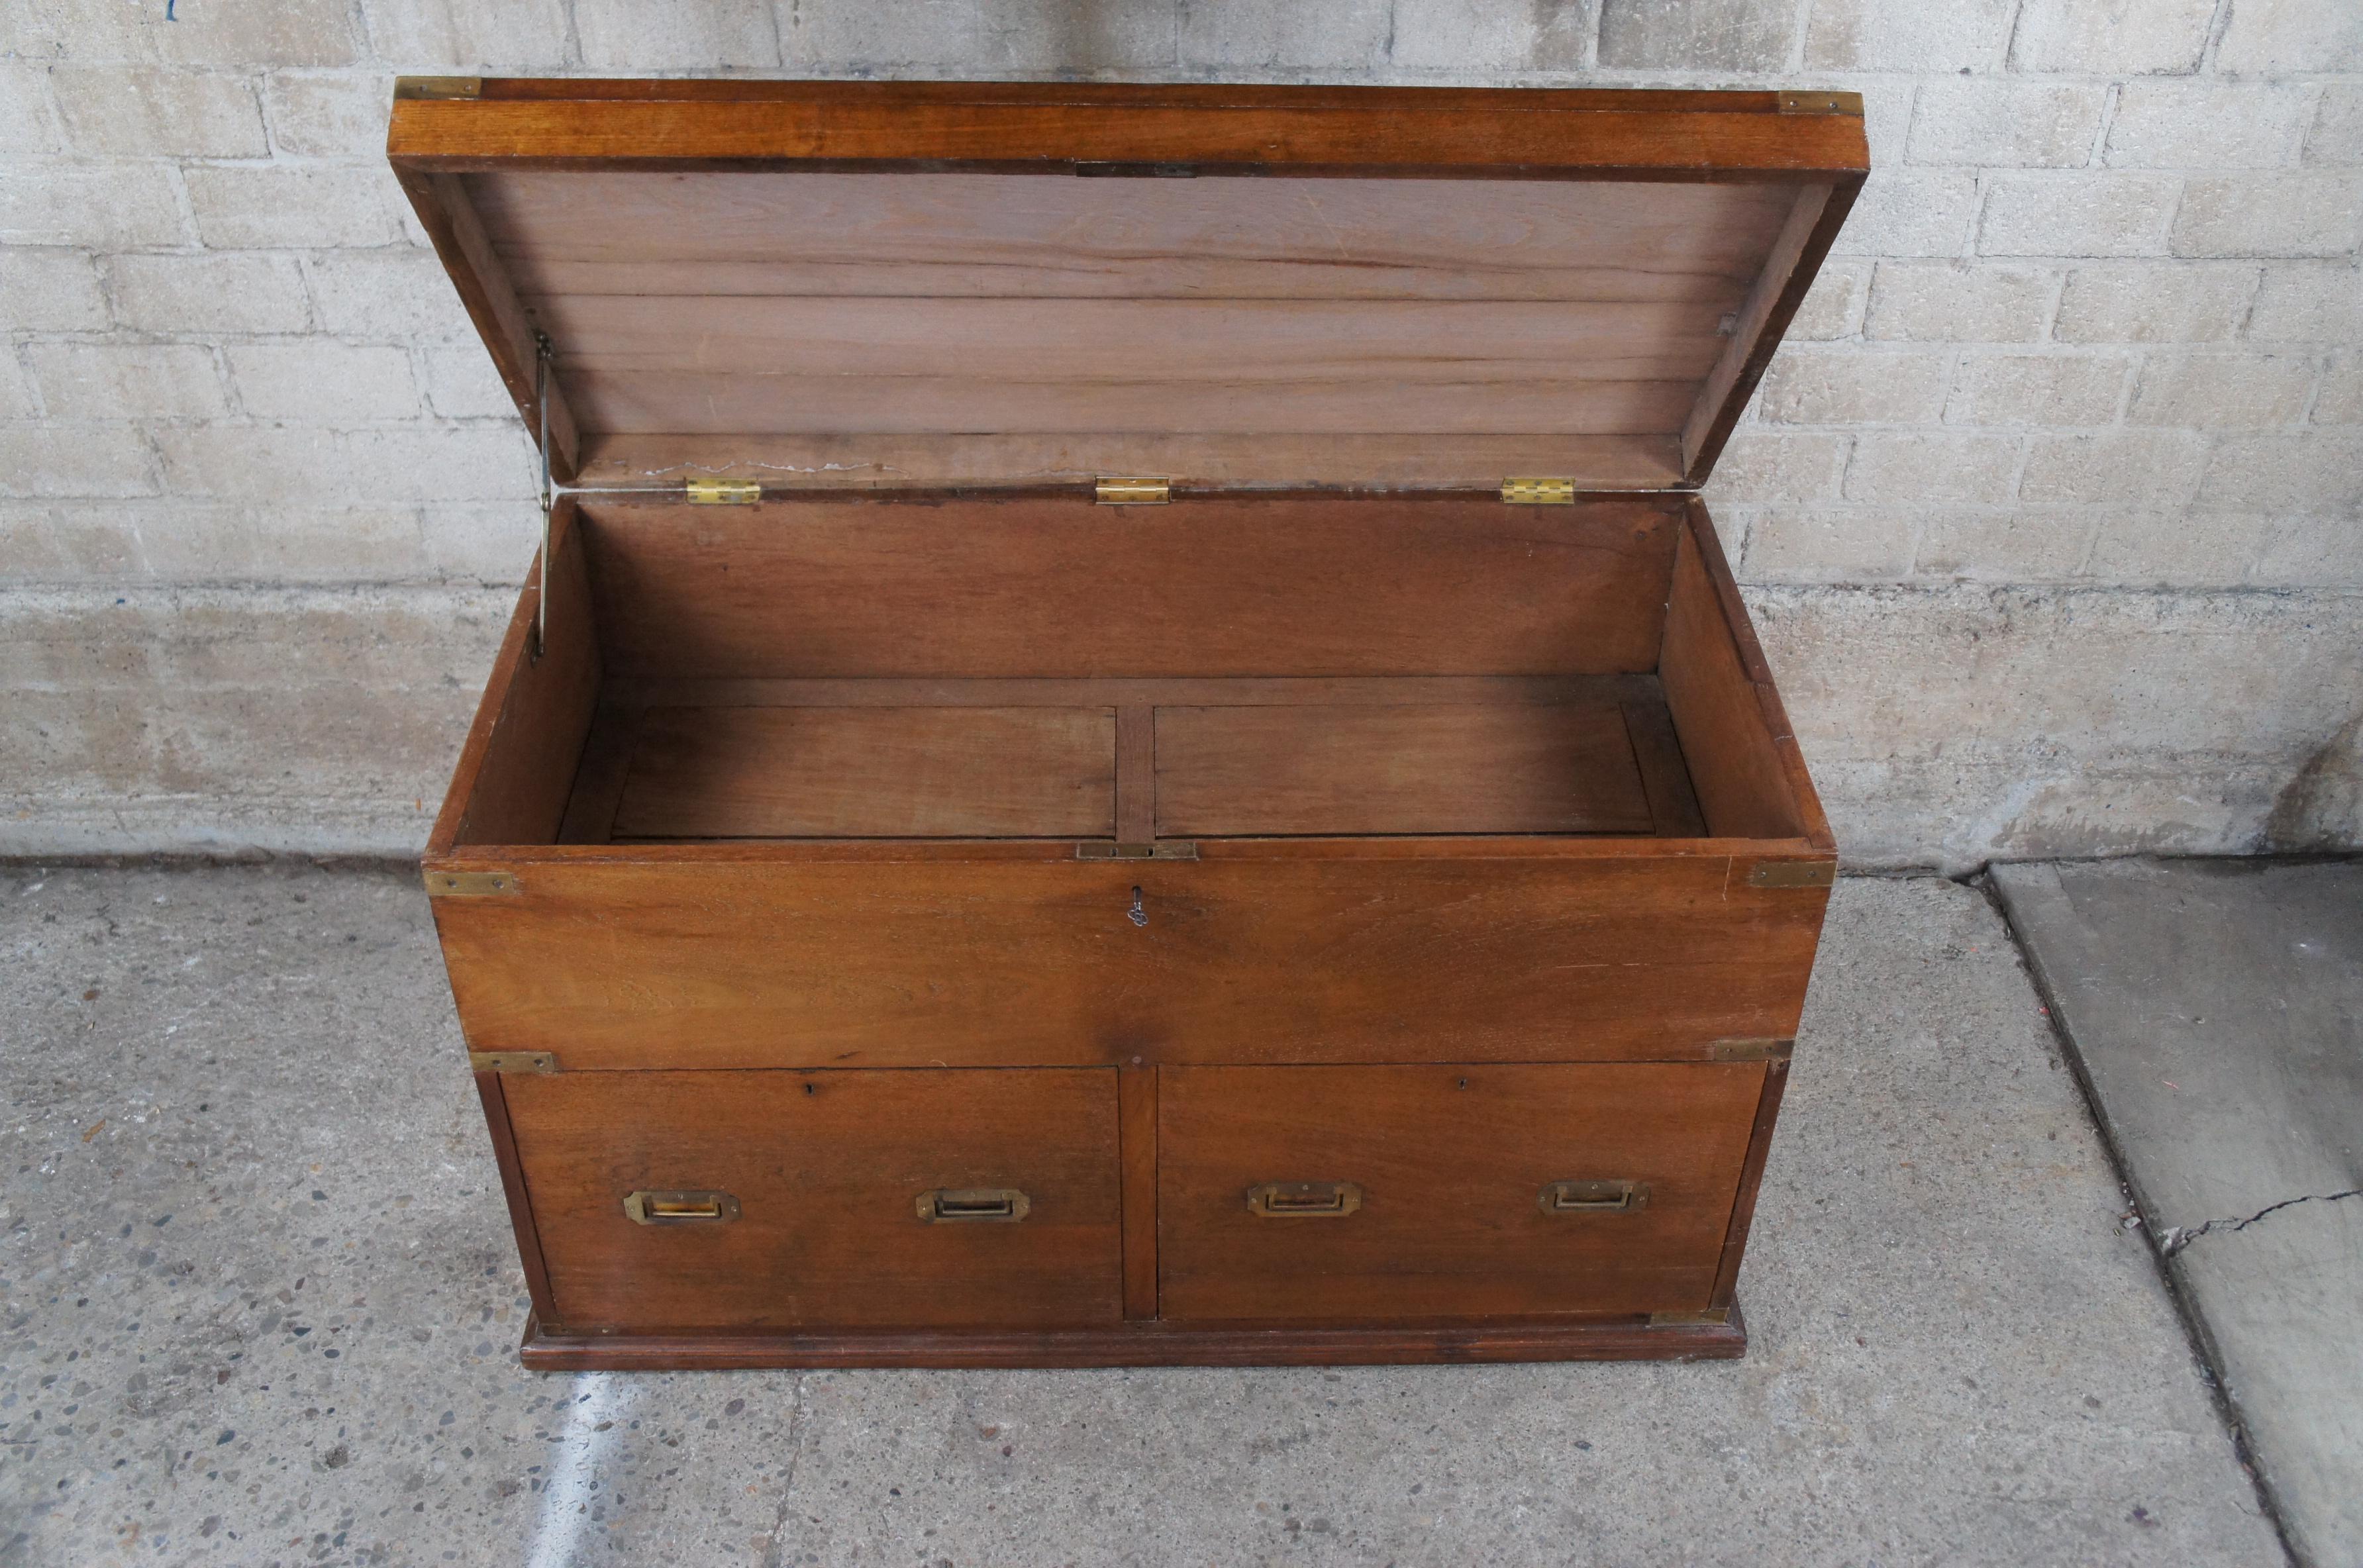 19th Century Antique British Colonial Camphor Brass Banded Campaign Sea Chest Storage Trunk 